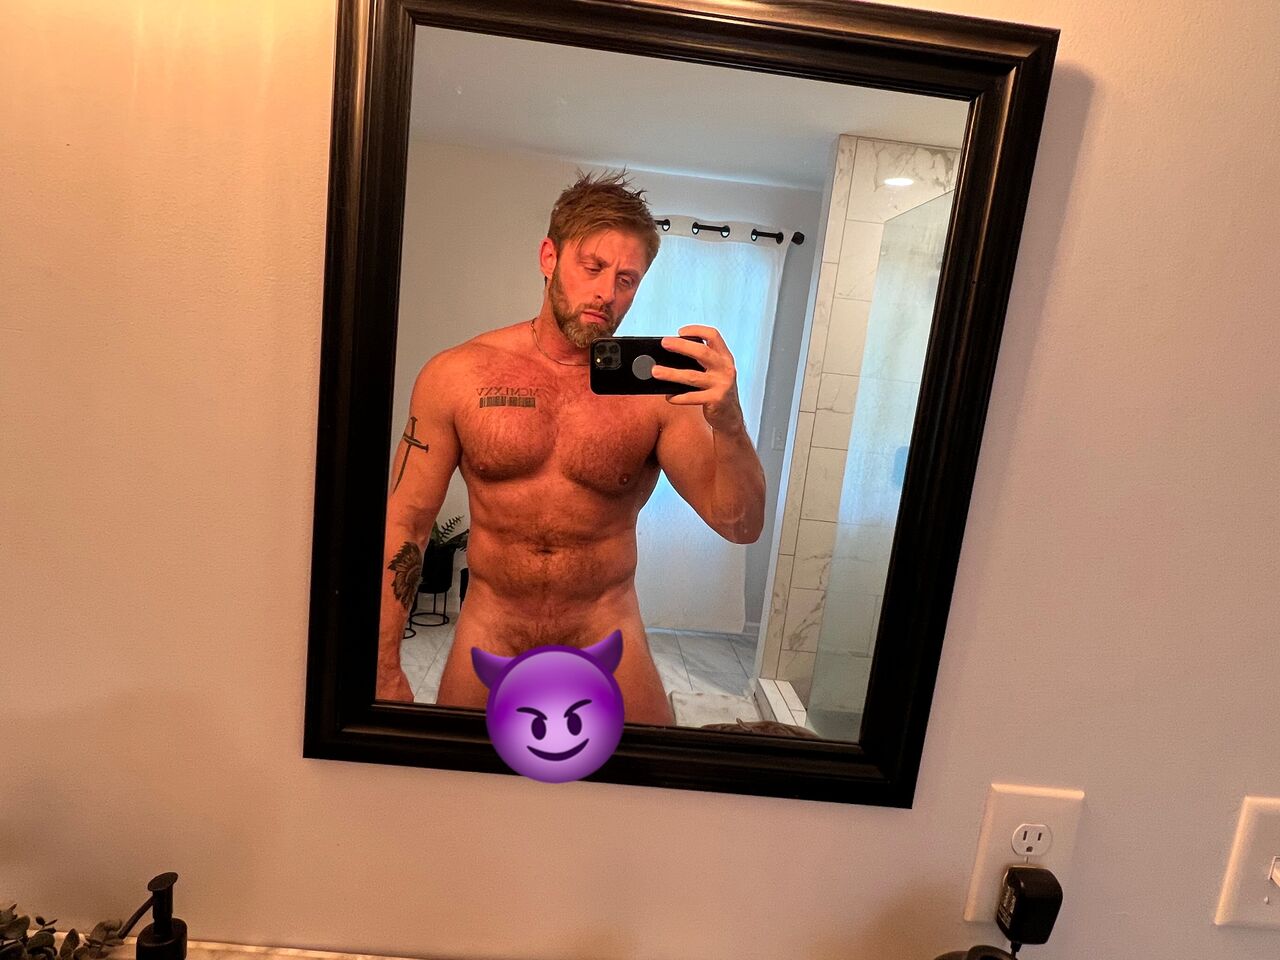 See Scott / VIP PAGE 😈 TOP 28% On OF profile